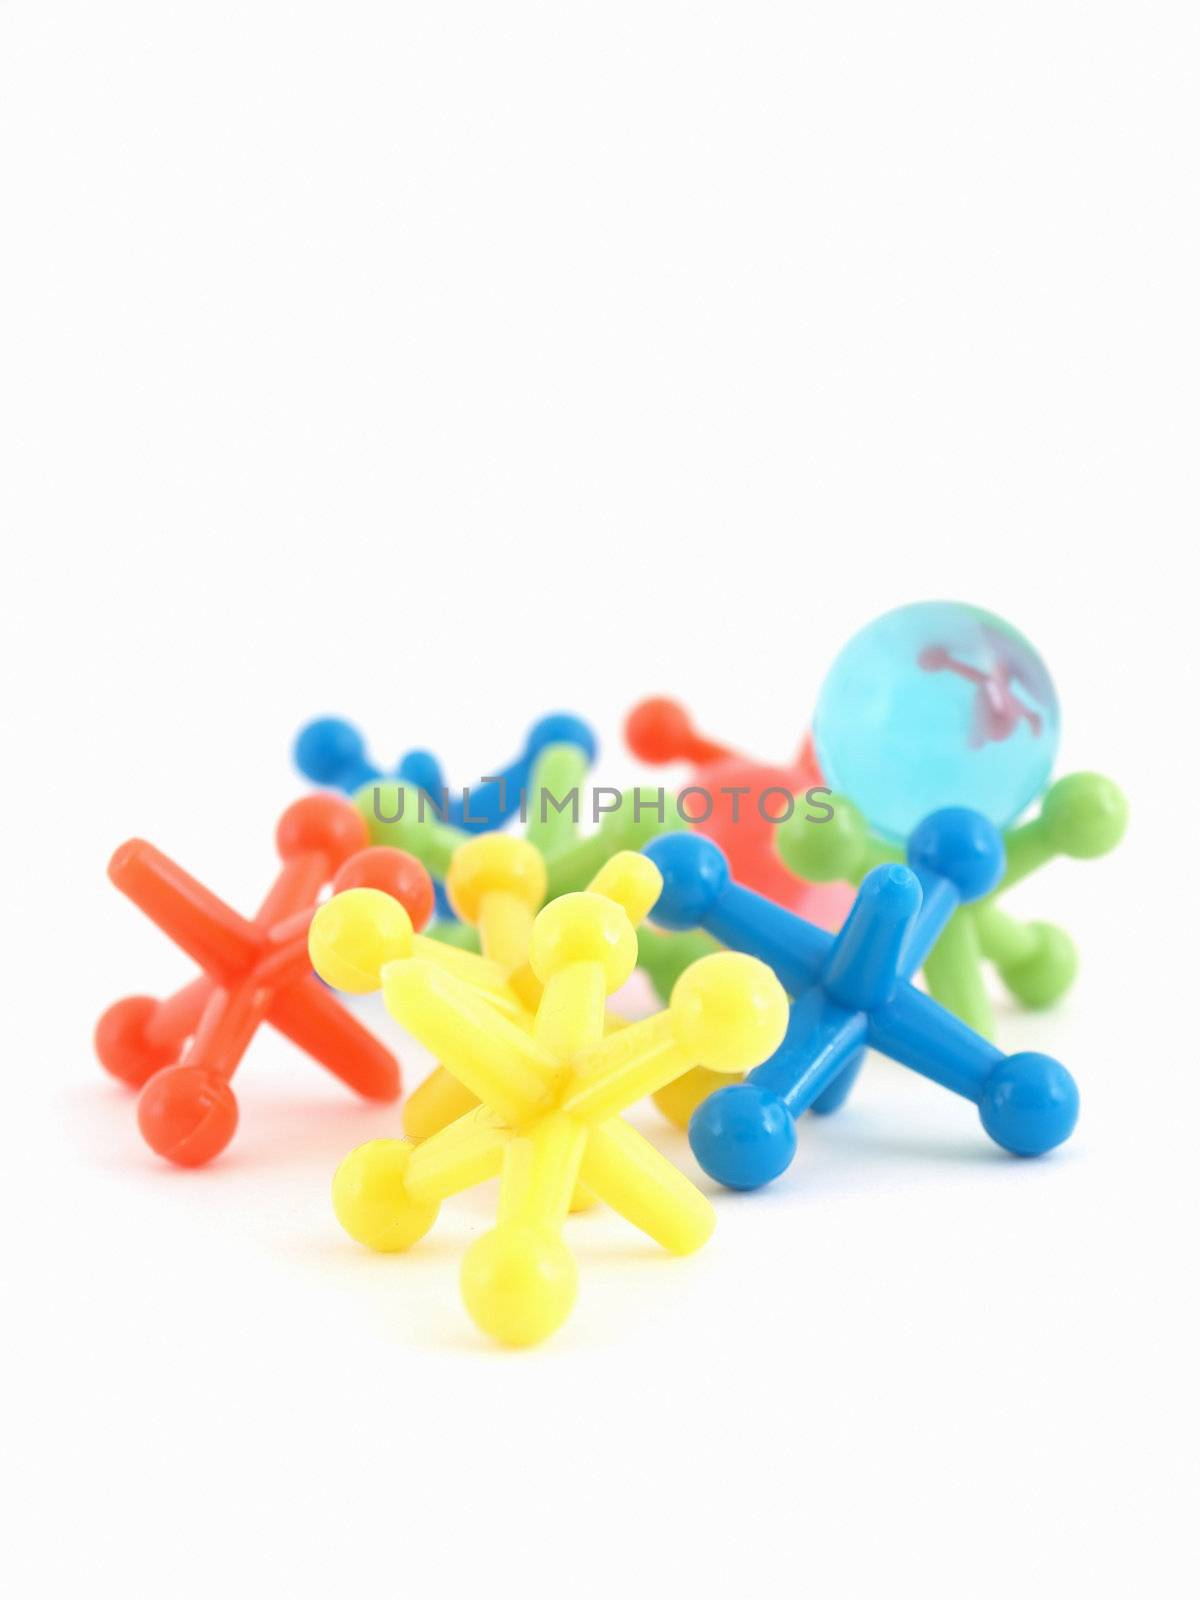 Colorful plastic toy jacks and a blue bouncy ball isolated on a white background